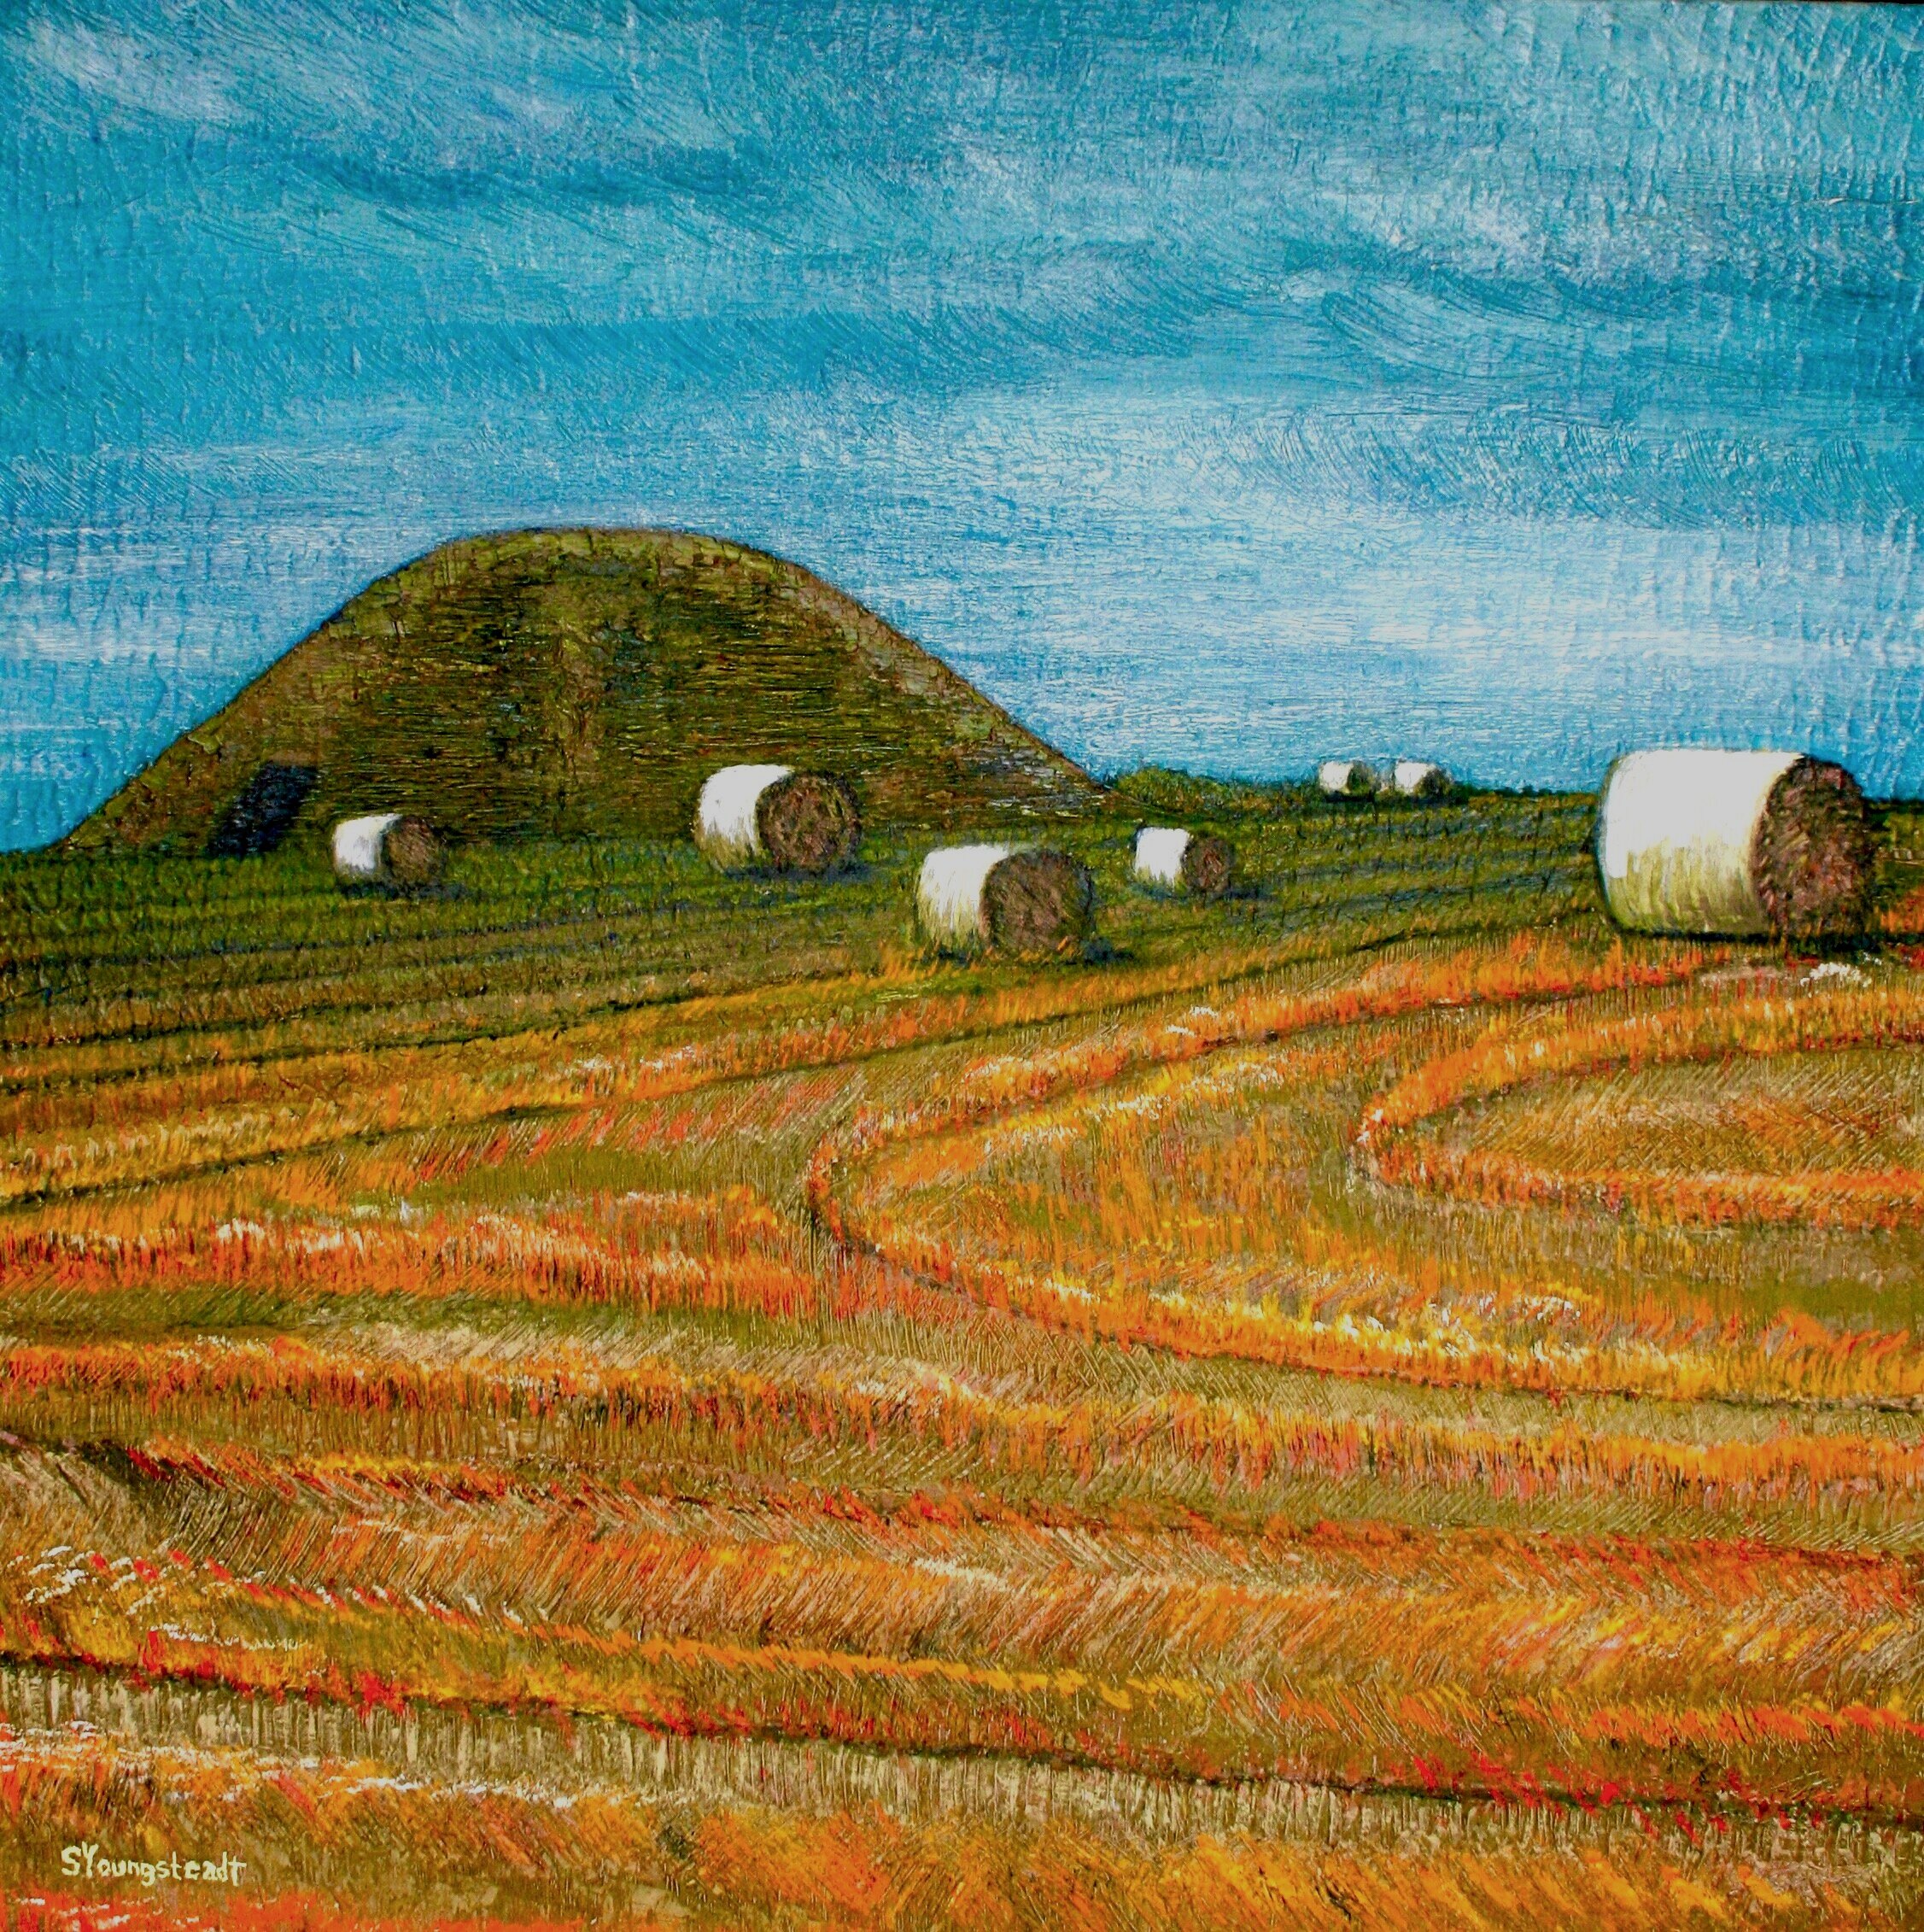 "Maeshowe Field, Orkney Isles"  by Susana Youngsteadt